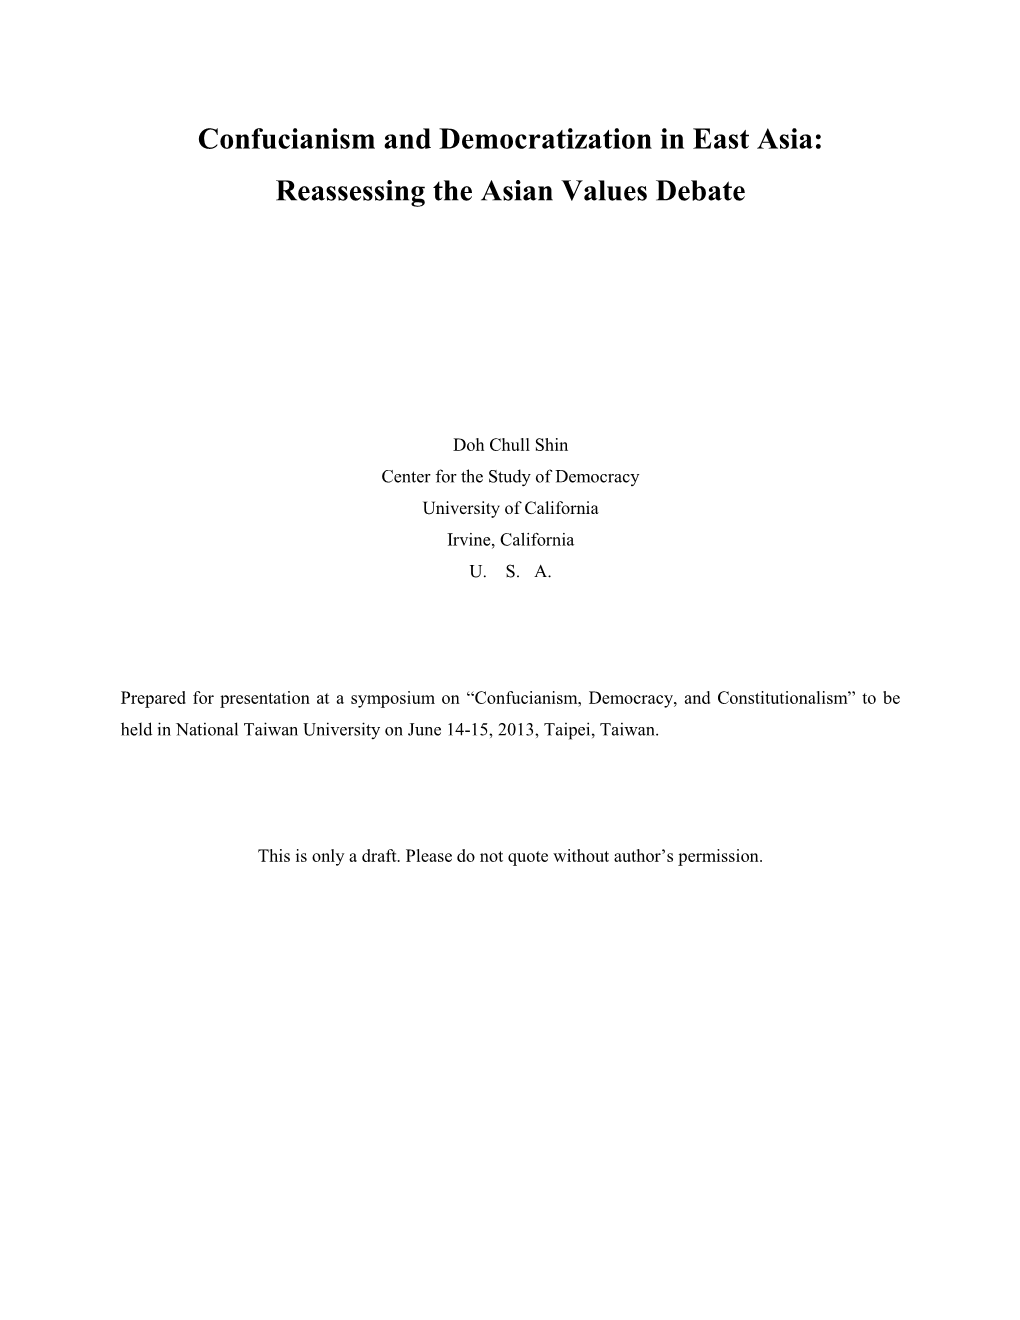 Confucianism and Democratization in East Asia: Reassessing the Asian Values Debate